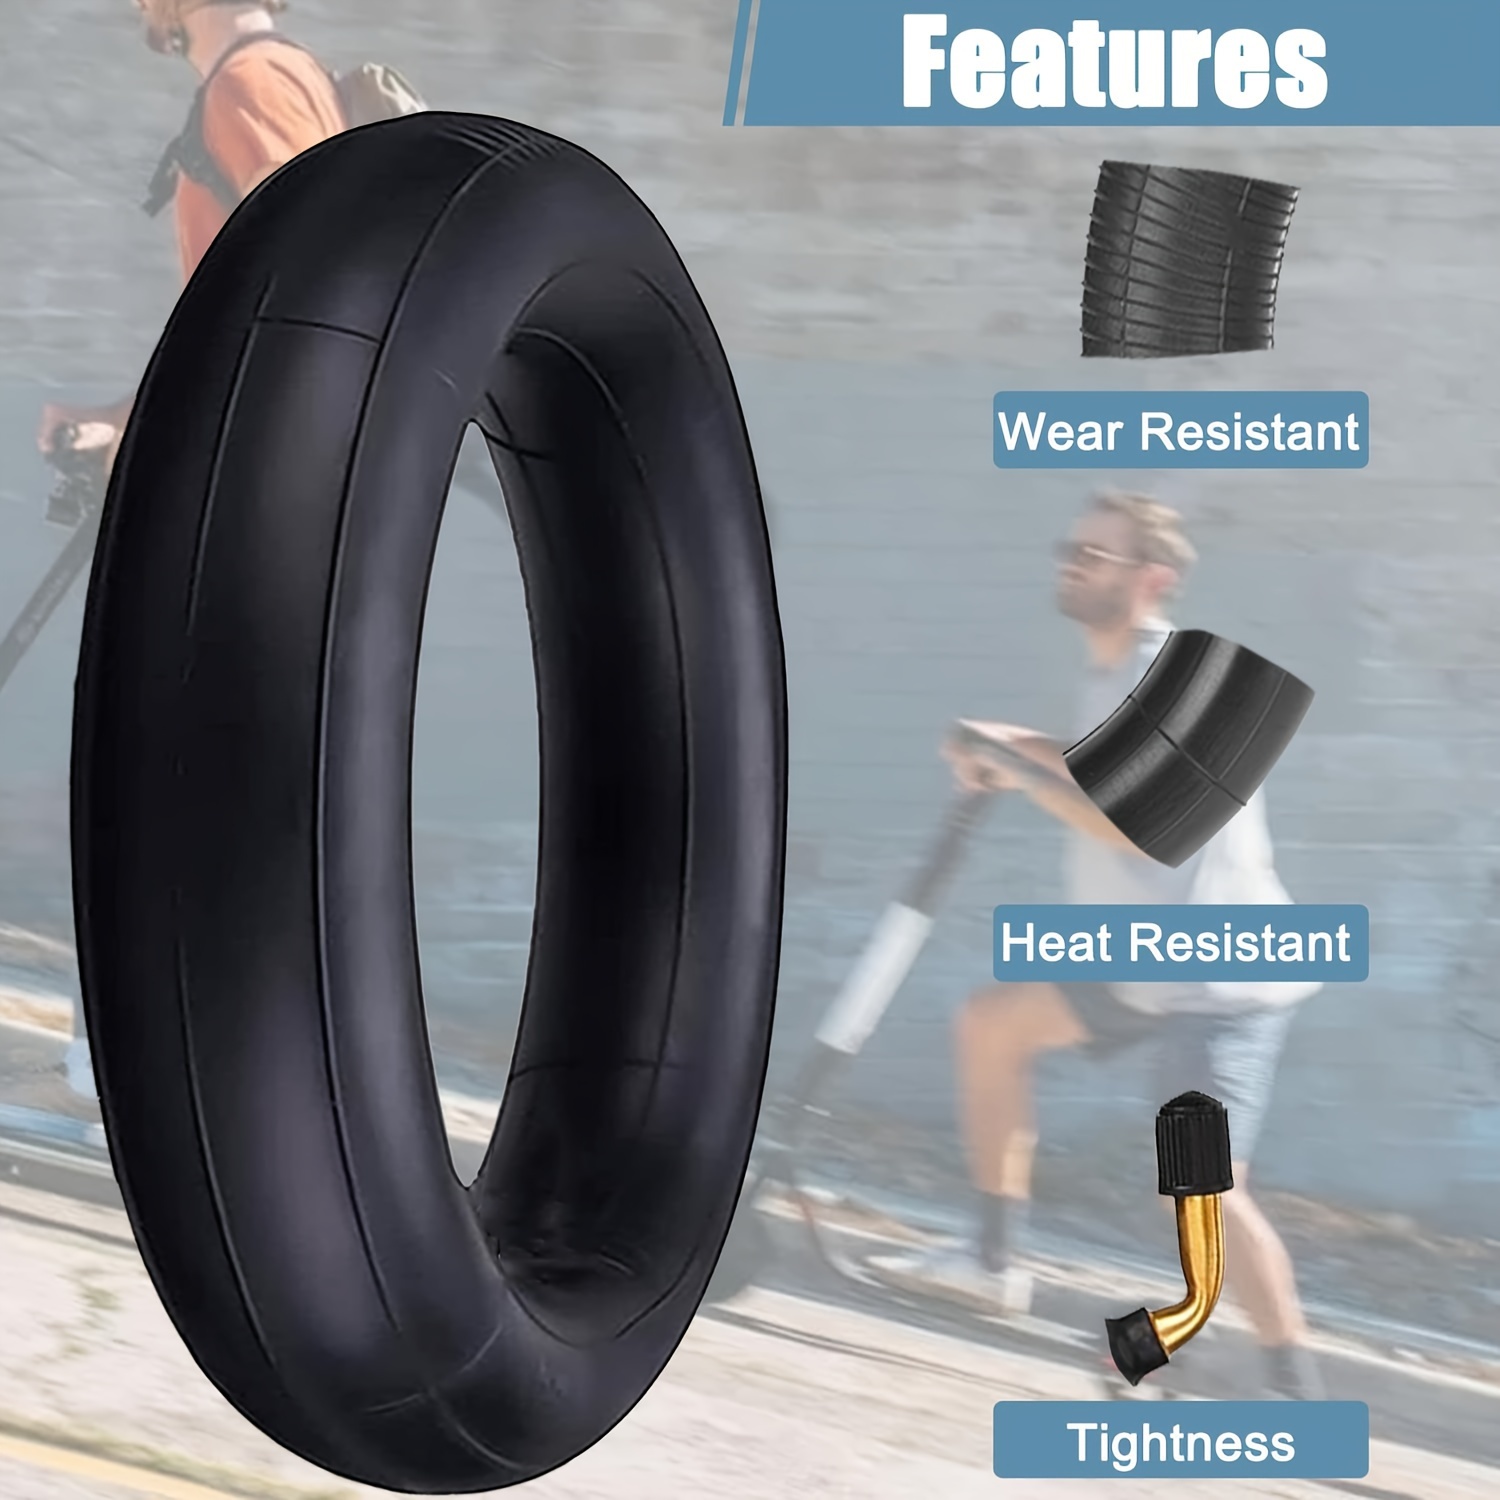 Electric scooter tire 10x2.125, (260x55)